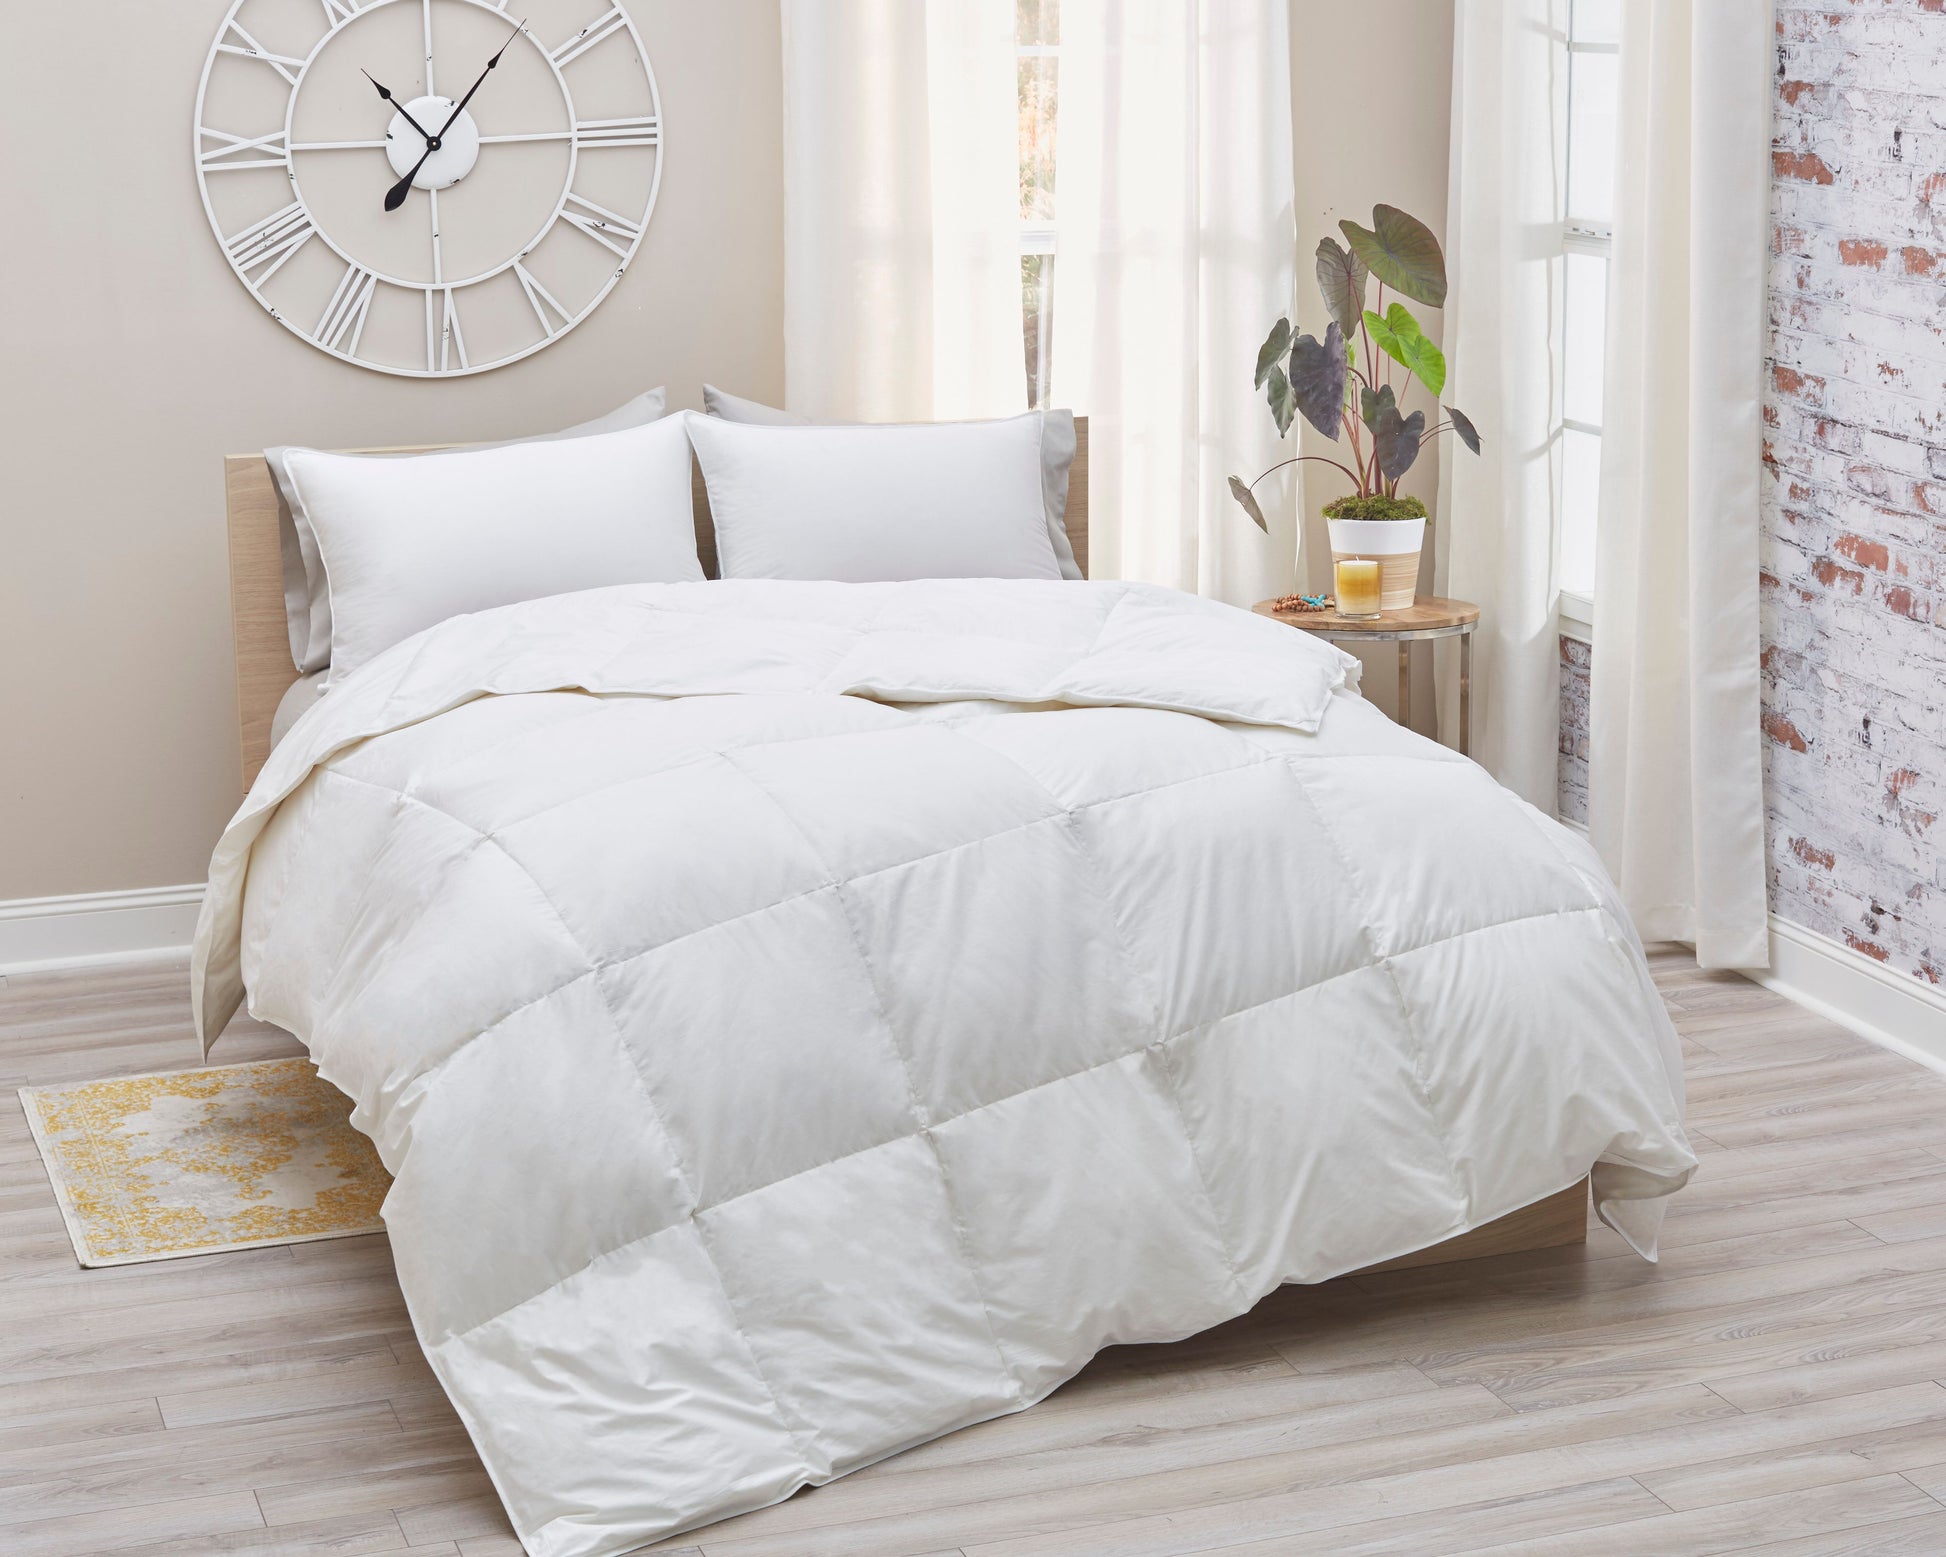 White Goose Down Comforter - BagLunchproduct,corp